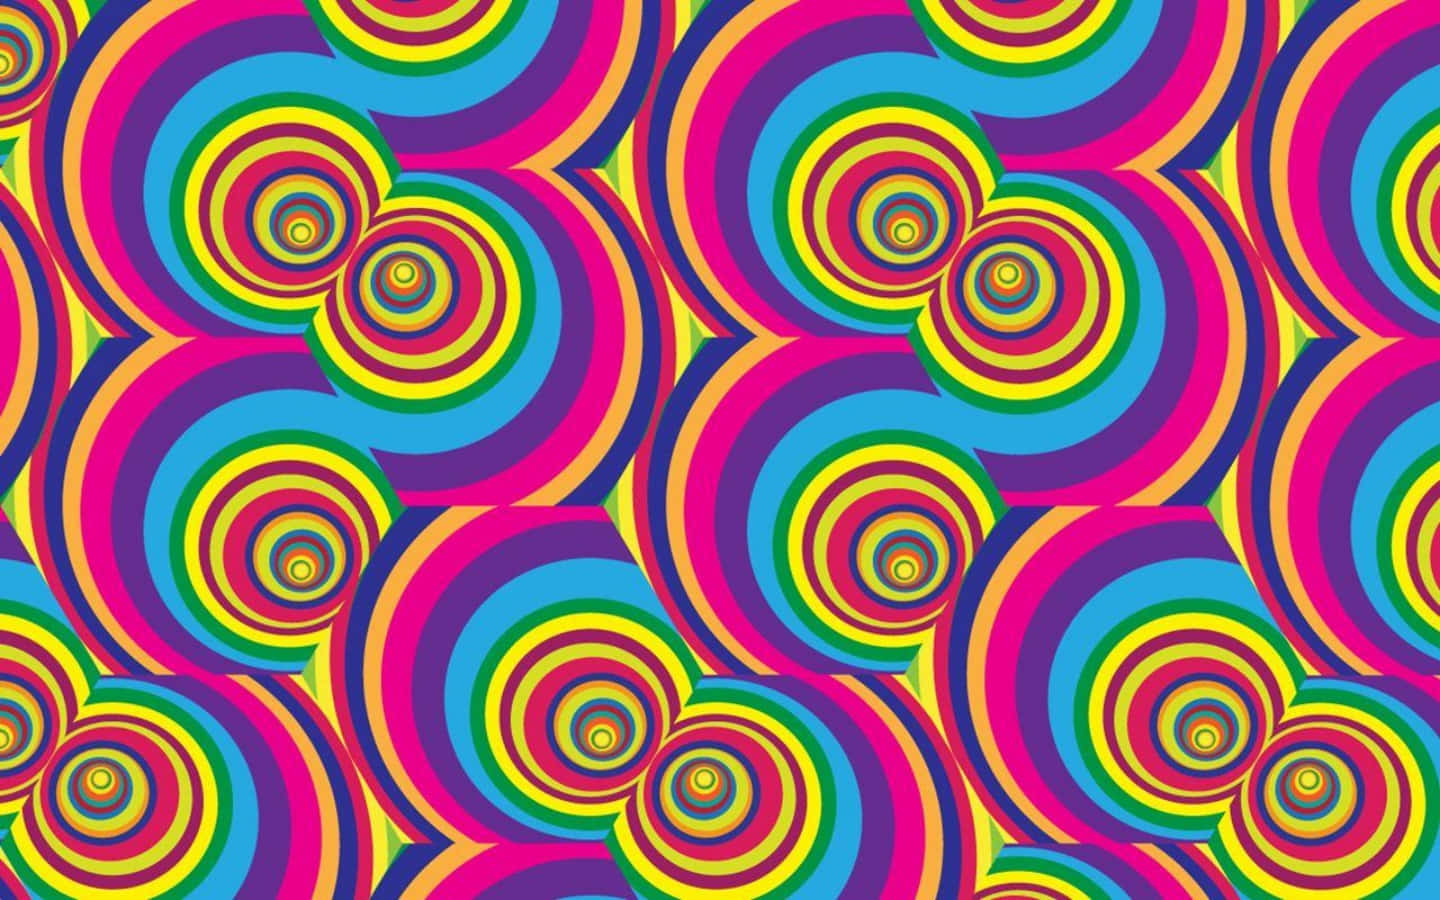 Take a Step Back in Time and Enjoy the Groovy Retro Style Wallpaper